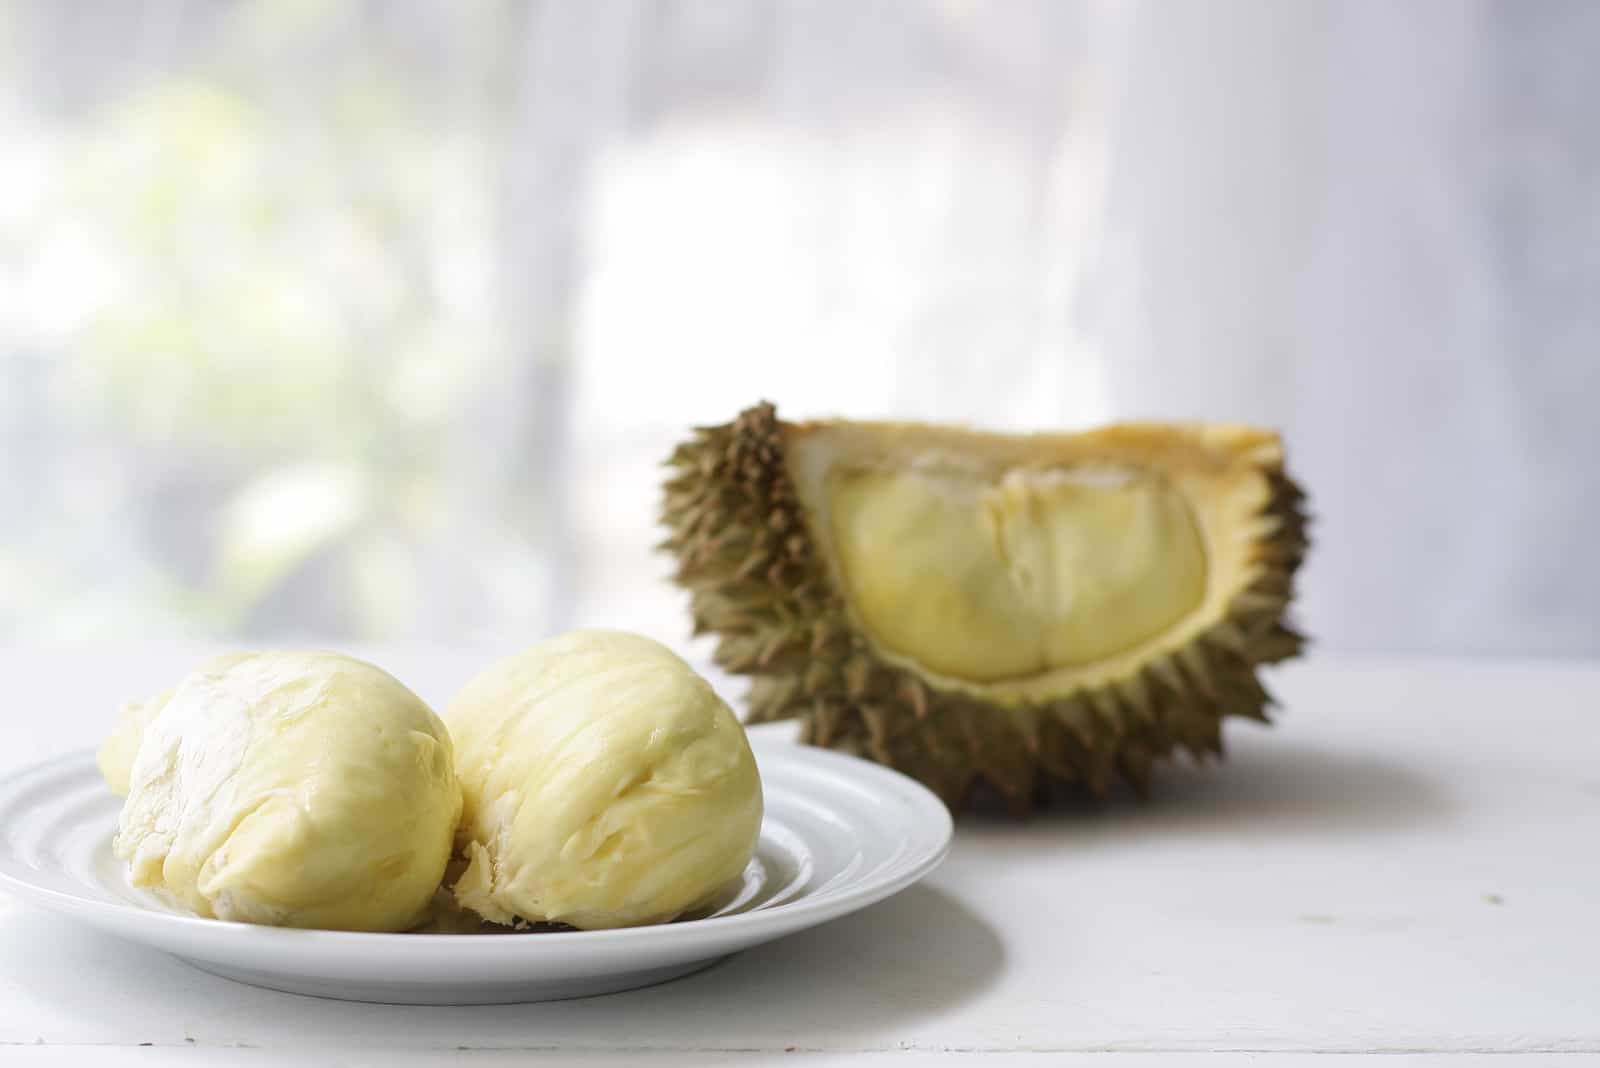 Can Dogs Eat Durian? Is The Hype Worth It?